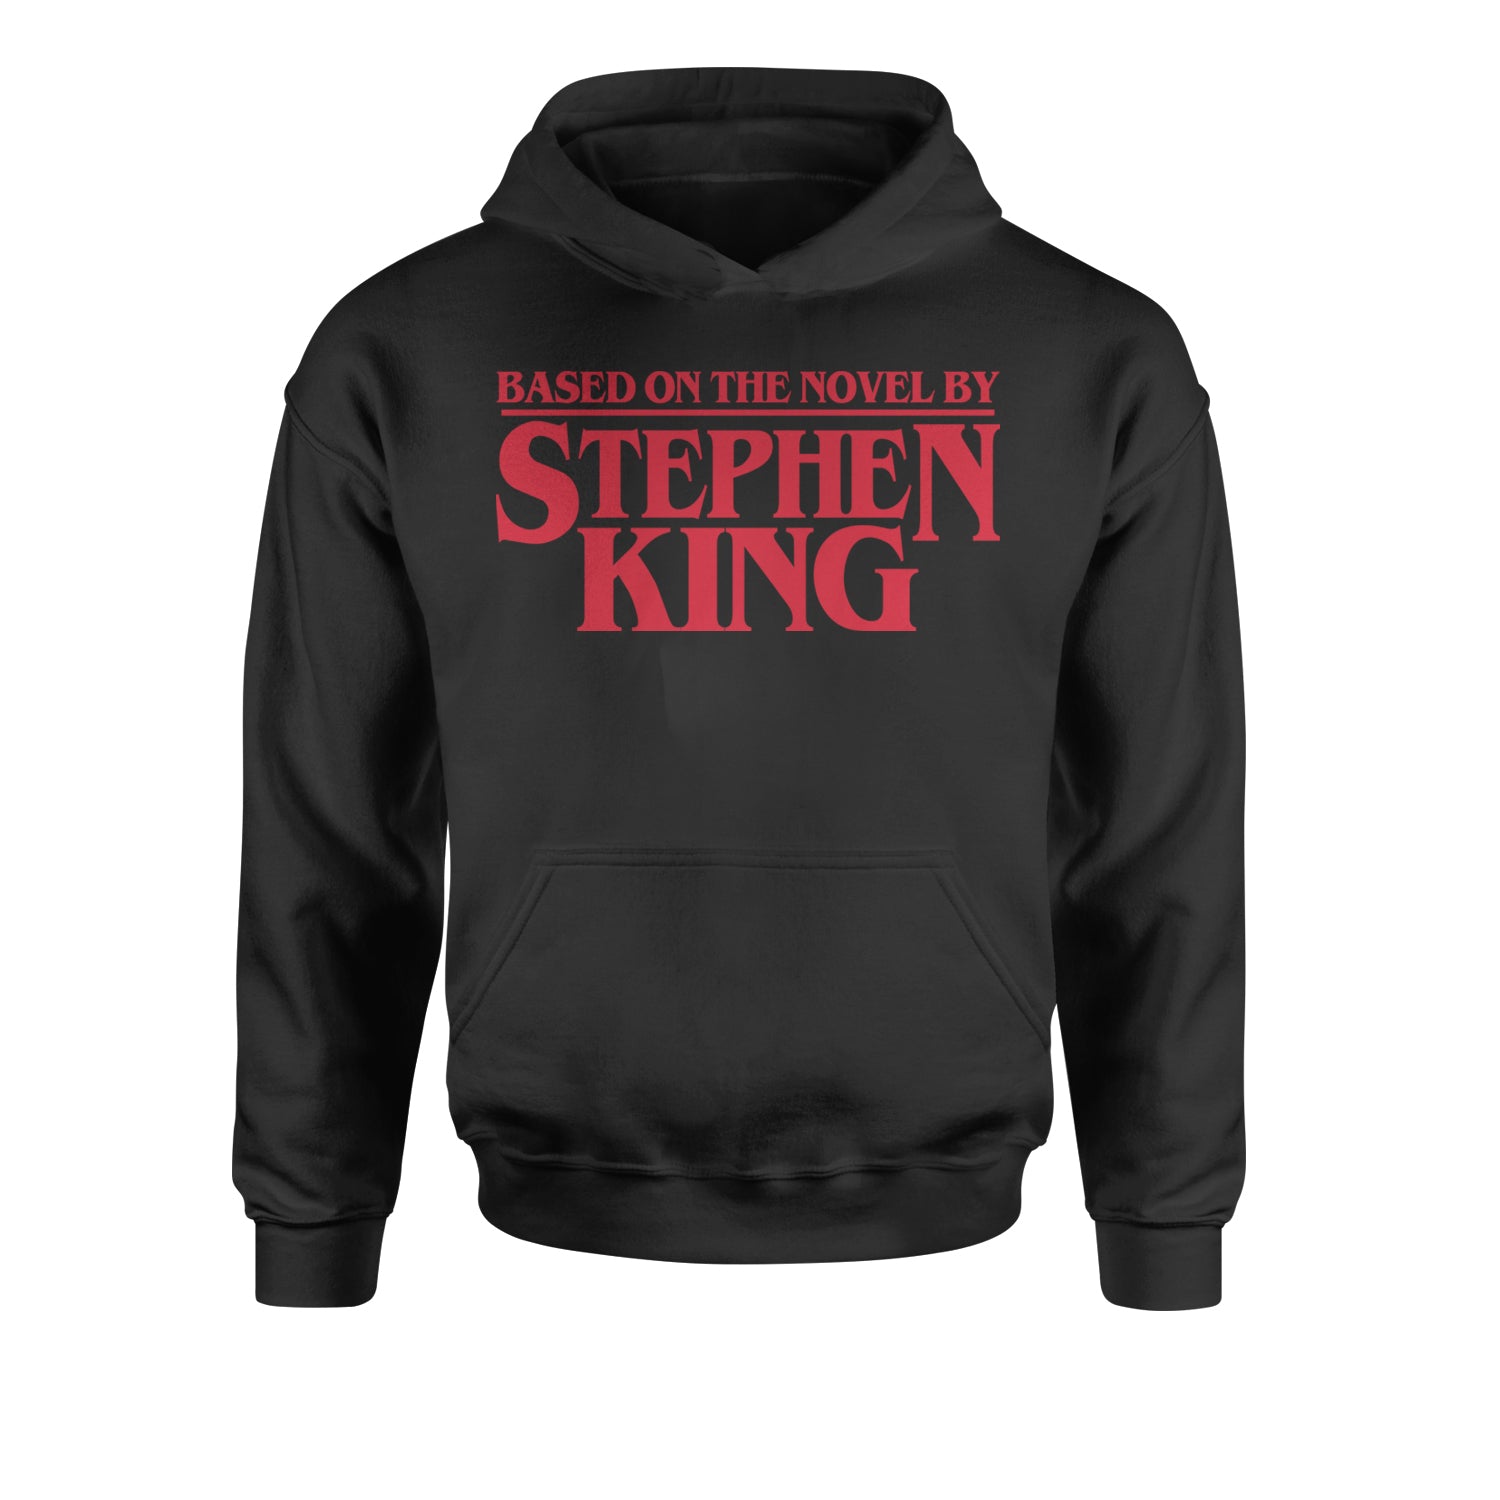 Based On The Novel By Stephen King Youth-Sized Hoodie